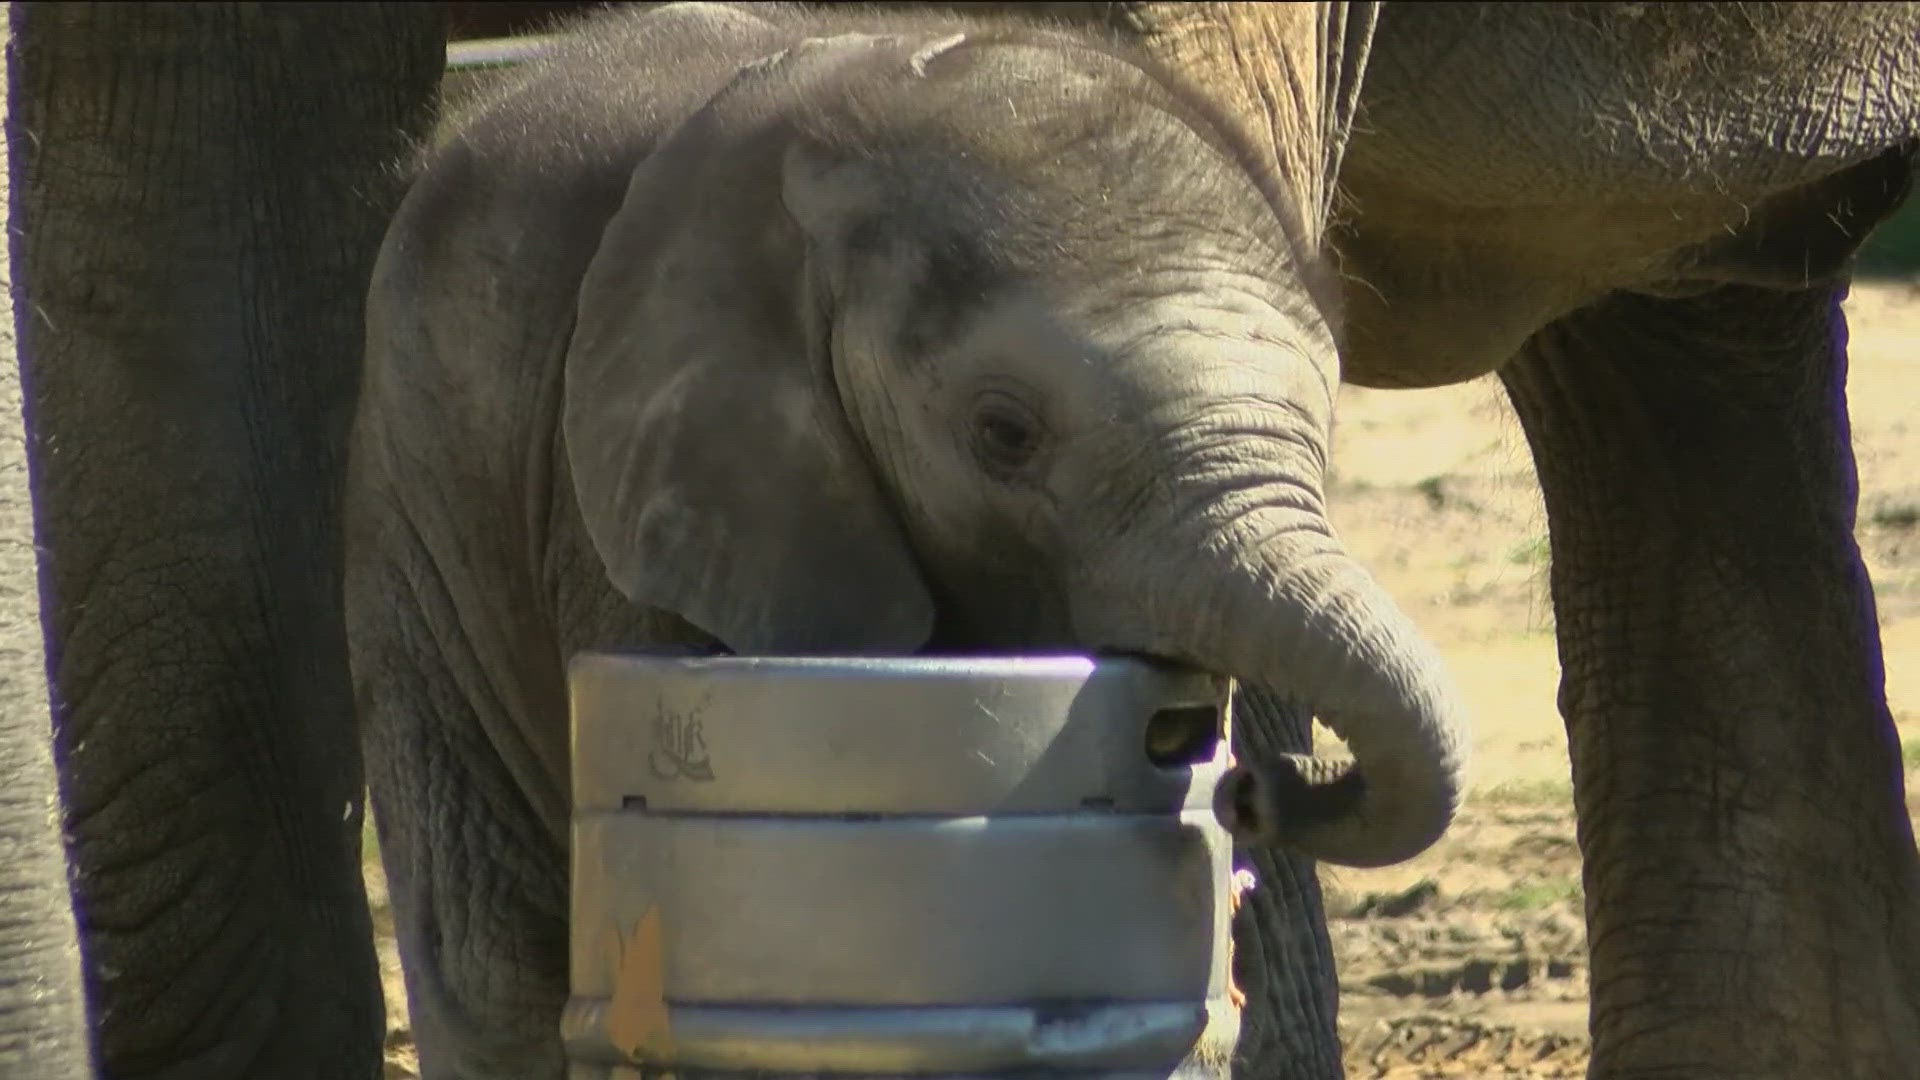 The Toledo Zoo announced that baby elephant Kirk is actually a girl, not a boy like it previously believed.